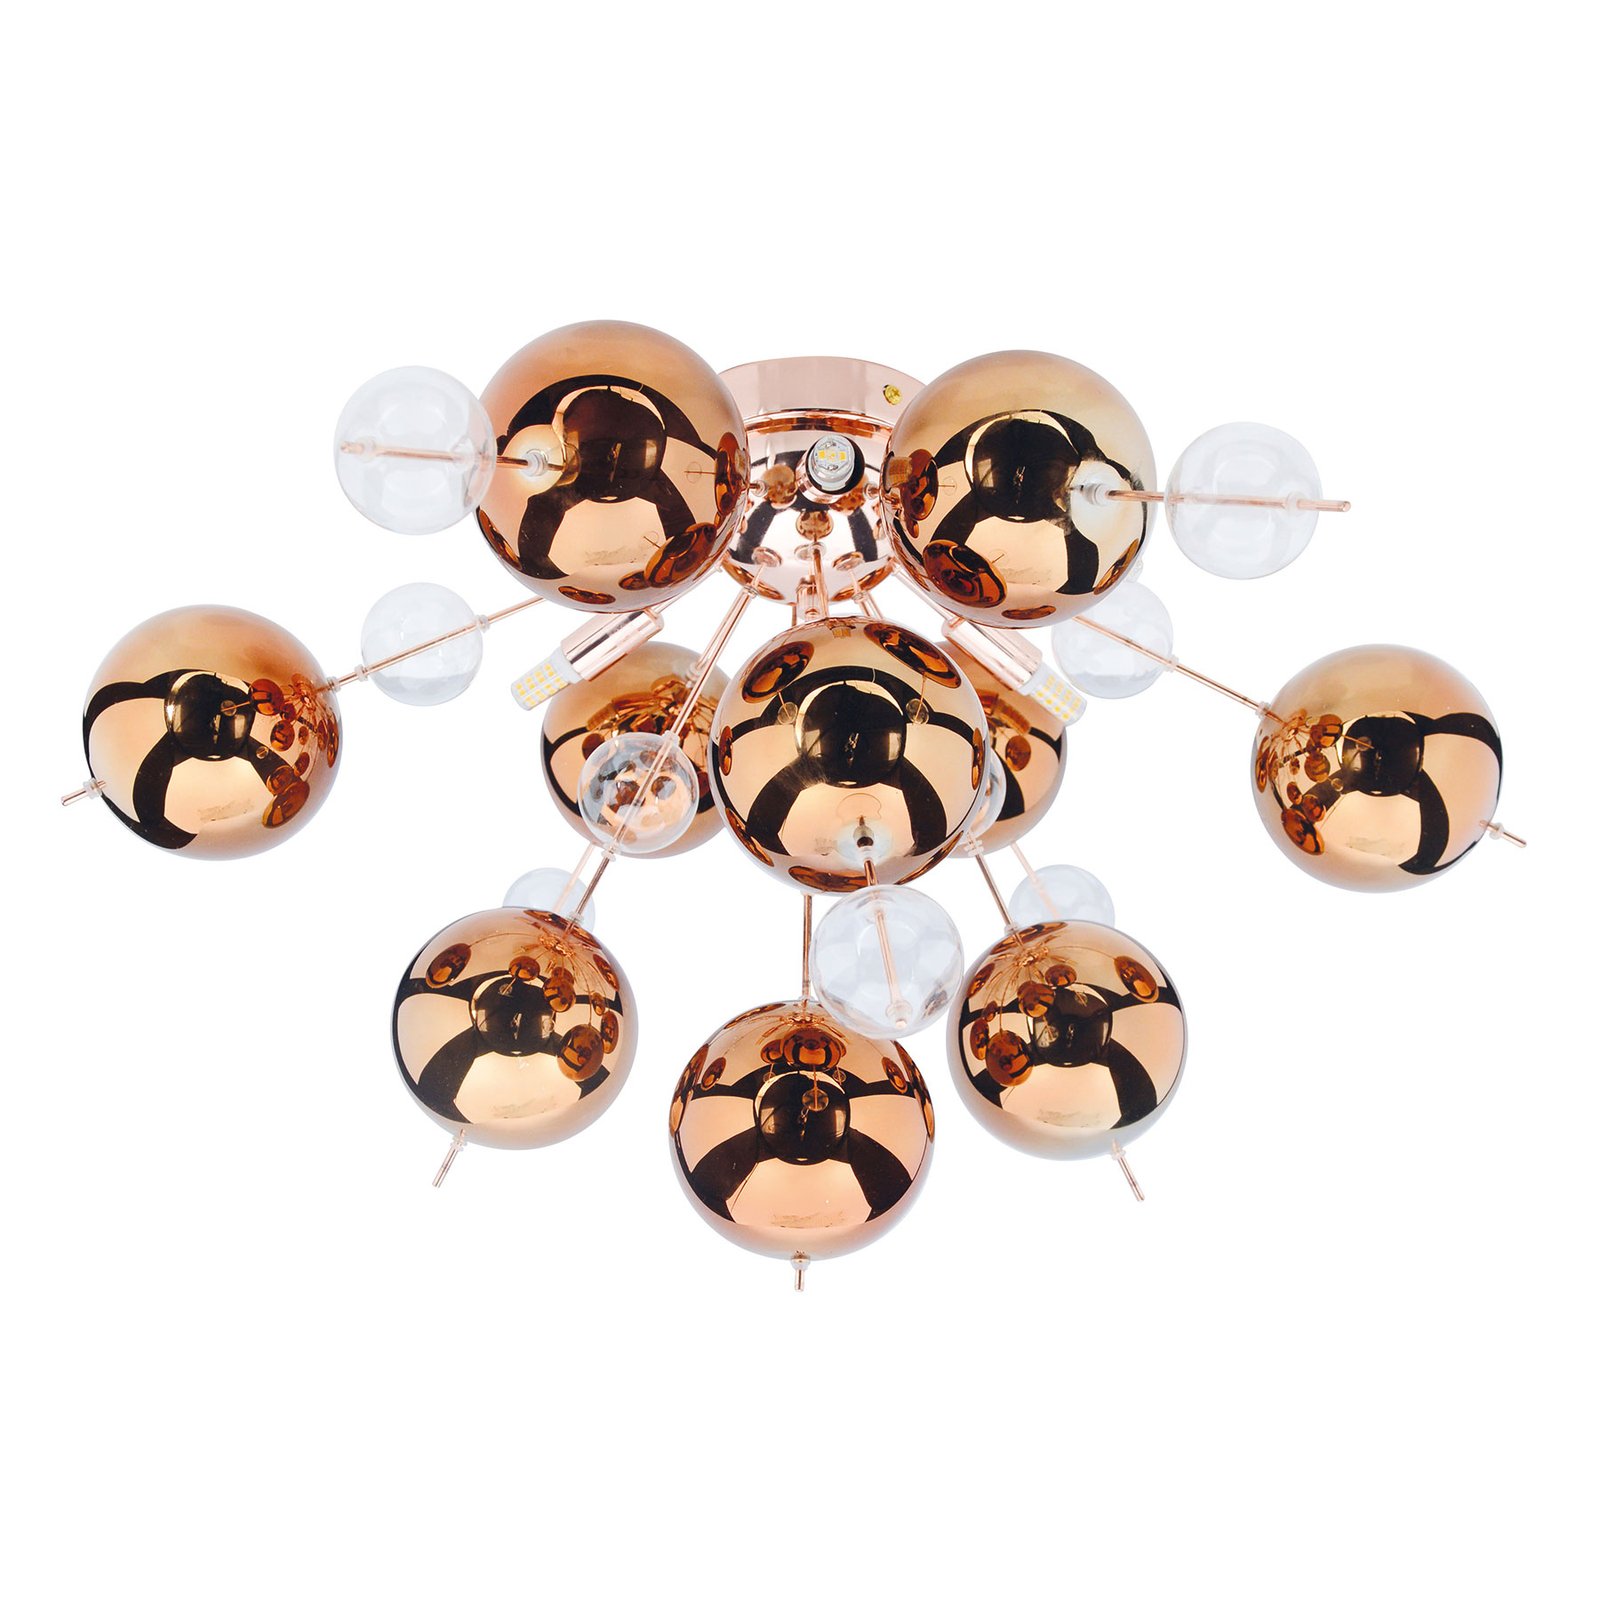 Explosion ceiling light, copper-coloured globes